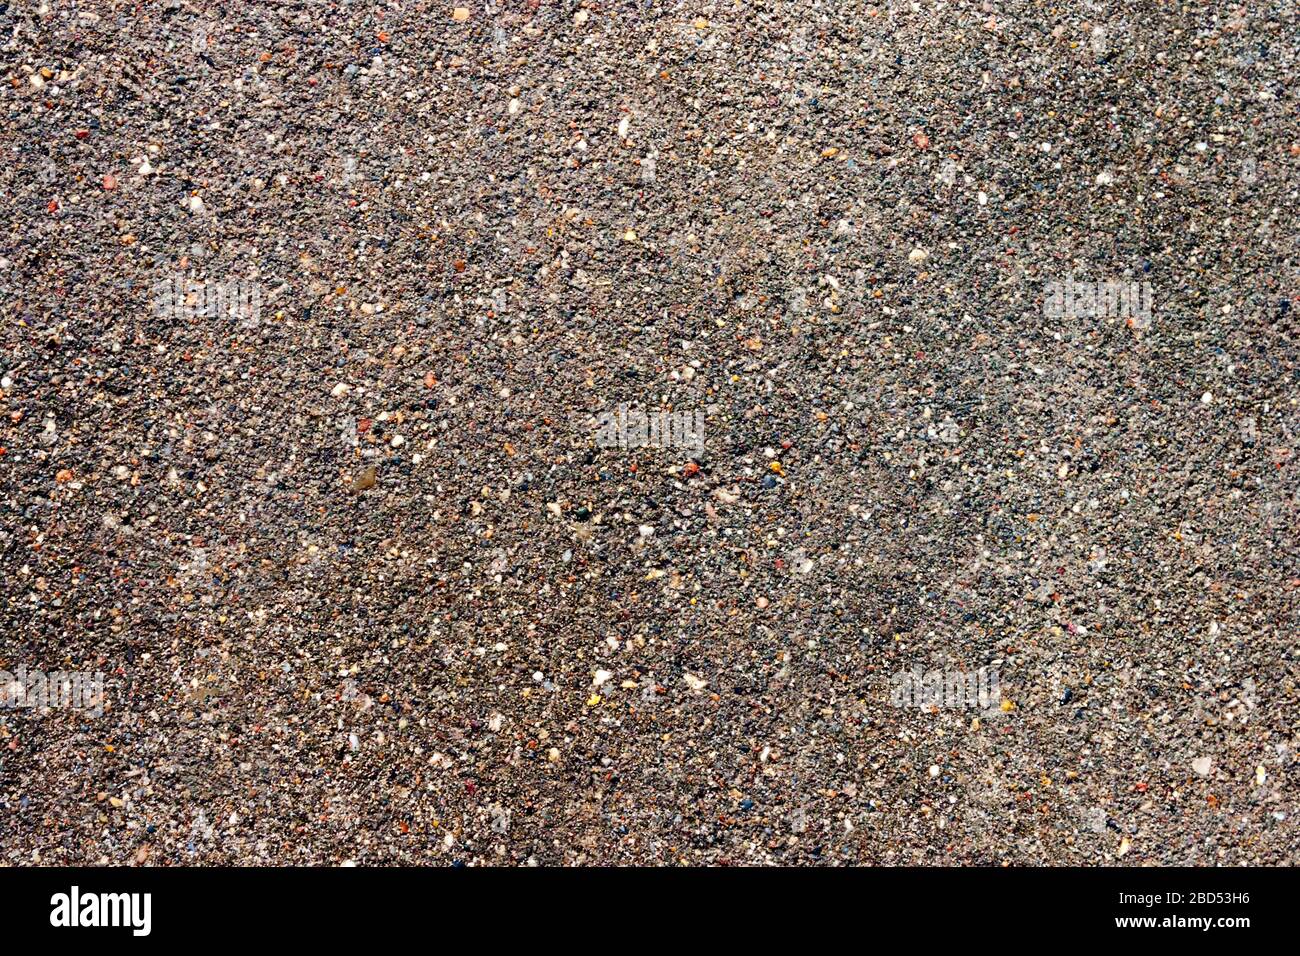 Abstract brown grey asphalt pavement road background. Roadway highway texture pattern backdrop. Stock Photo